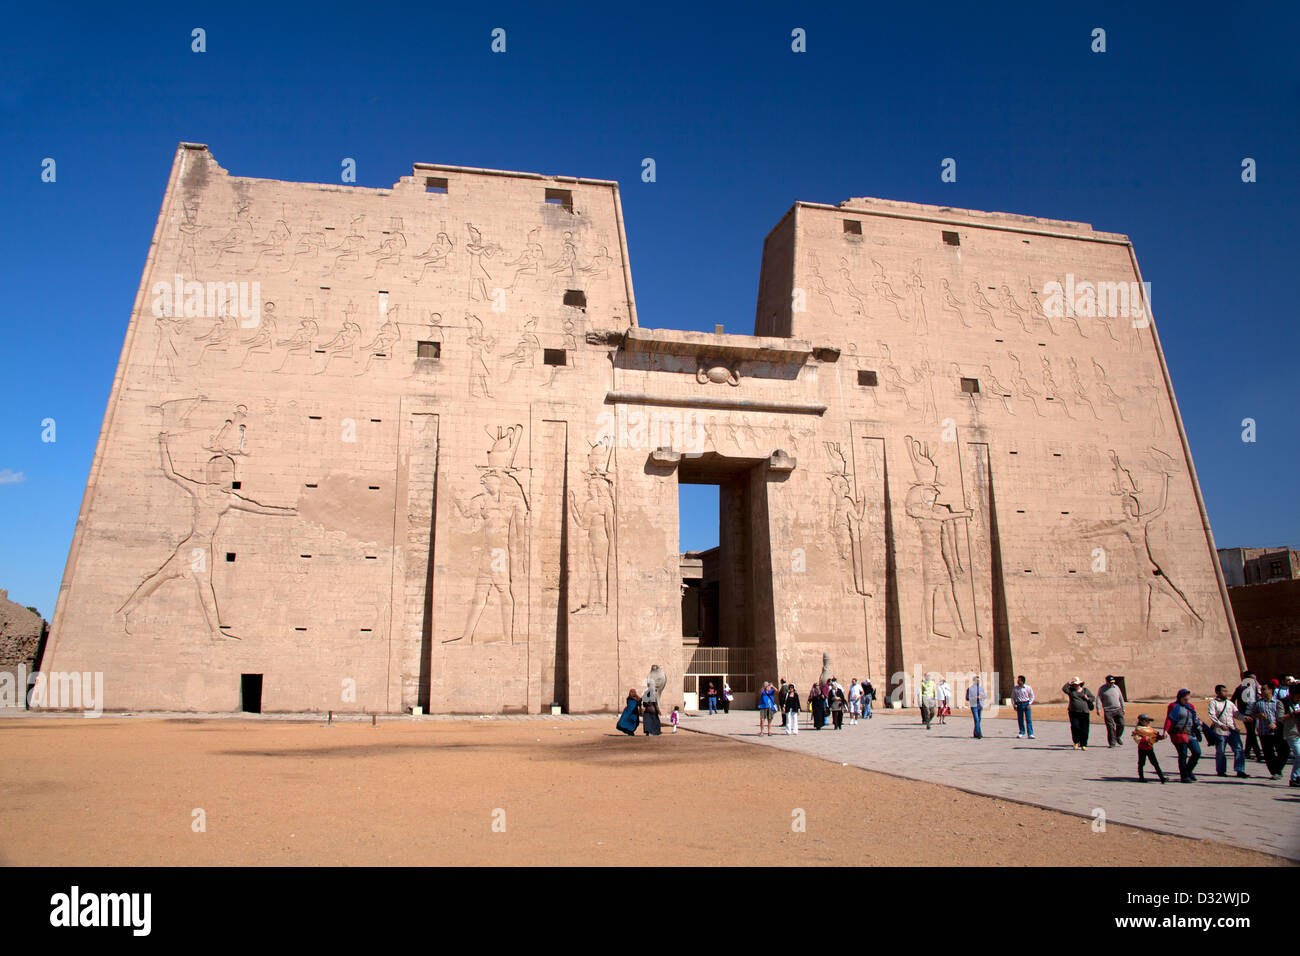 The entrance pylon to the Temple of Horus at Edfu on the River Nile in ...